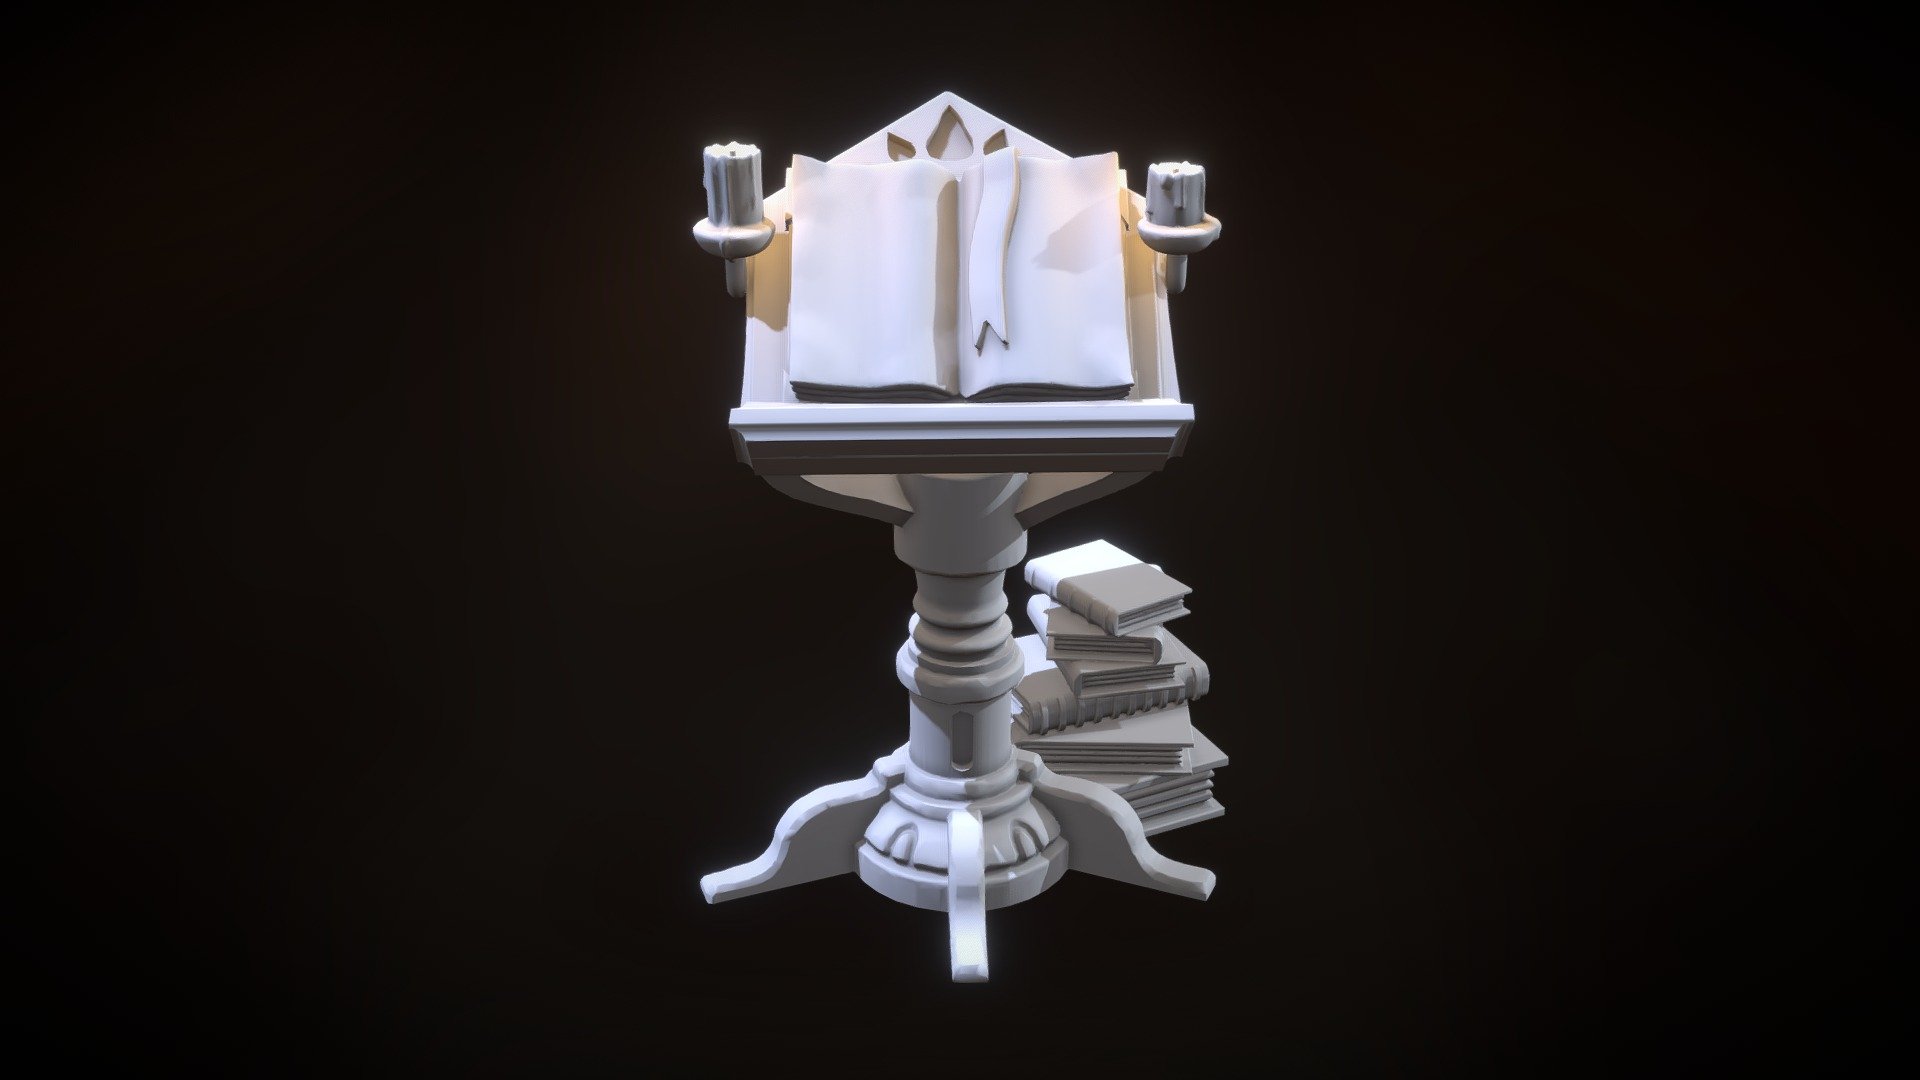 Miniature 3D Printable wooden book stand/podium for D&amp;D and tabletop games!

File available for purchase in a 3D-Printable set from Infinite Dimensions Games:
https://www.infinitedimensions.ca/product/3d-printable-noblemans-furnishings/ - Miniature 3D Printable Book Stand/Podium - 3D model by Rita Puhakka (@RitaPuhakka) 3d model